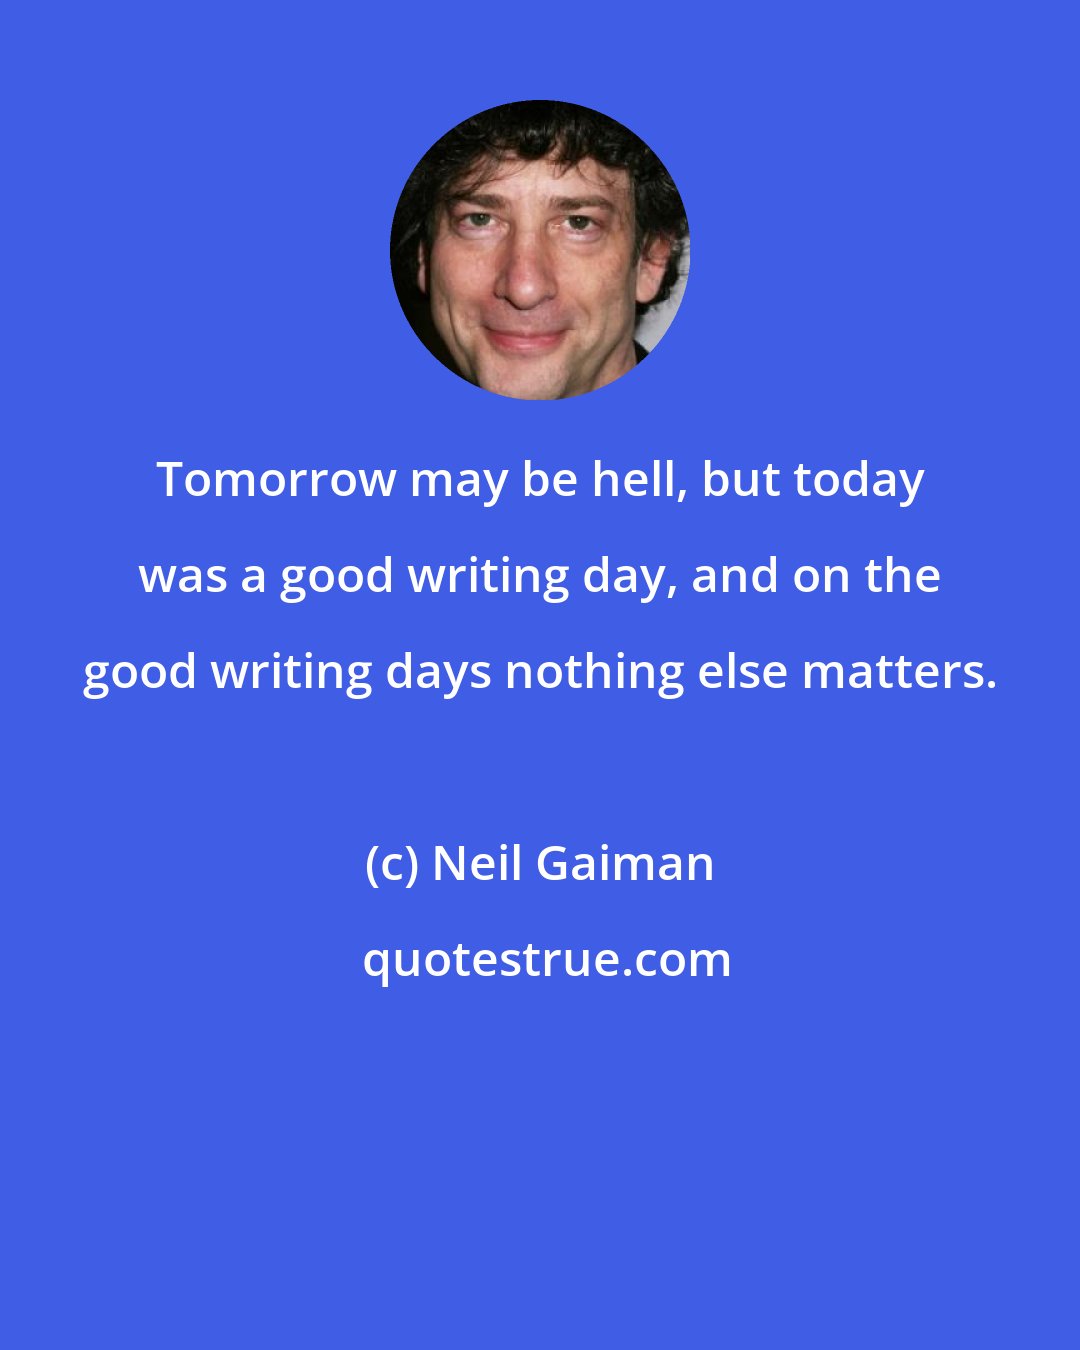 Neil Gaiman: Tomorrow may be hell, but today was a good writing day, and on the good writing days nothing else matters.